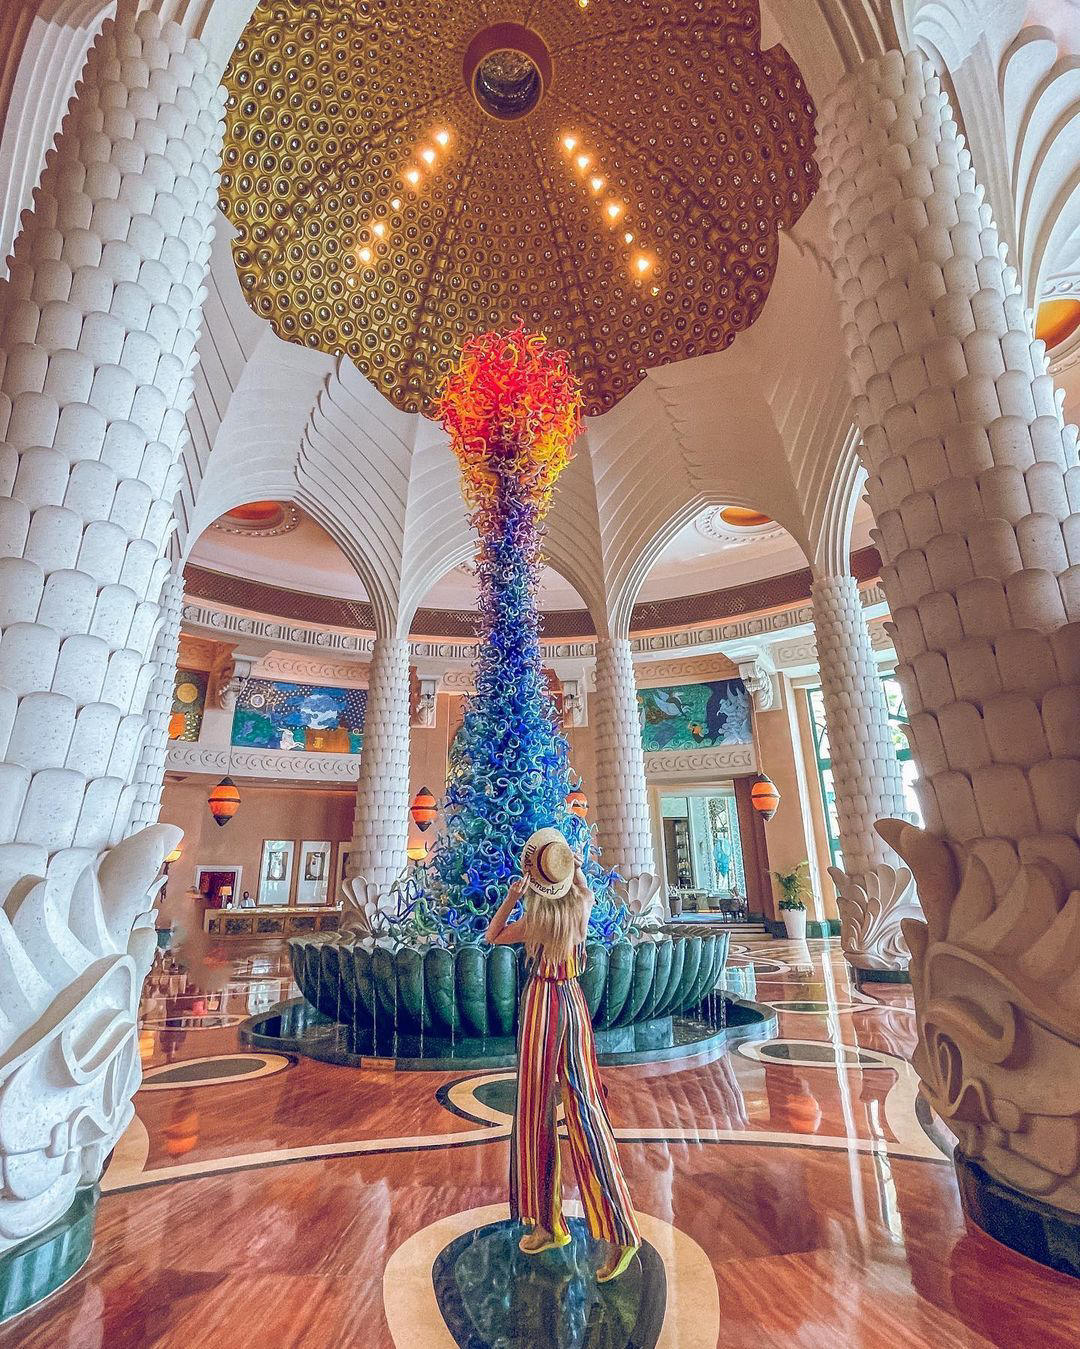 image  1 Atlantis The Palm, Dubai - Bringing out the best and brightest colours in you